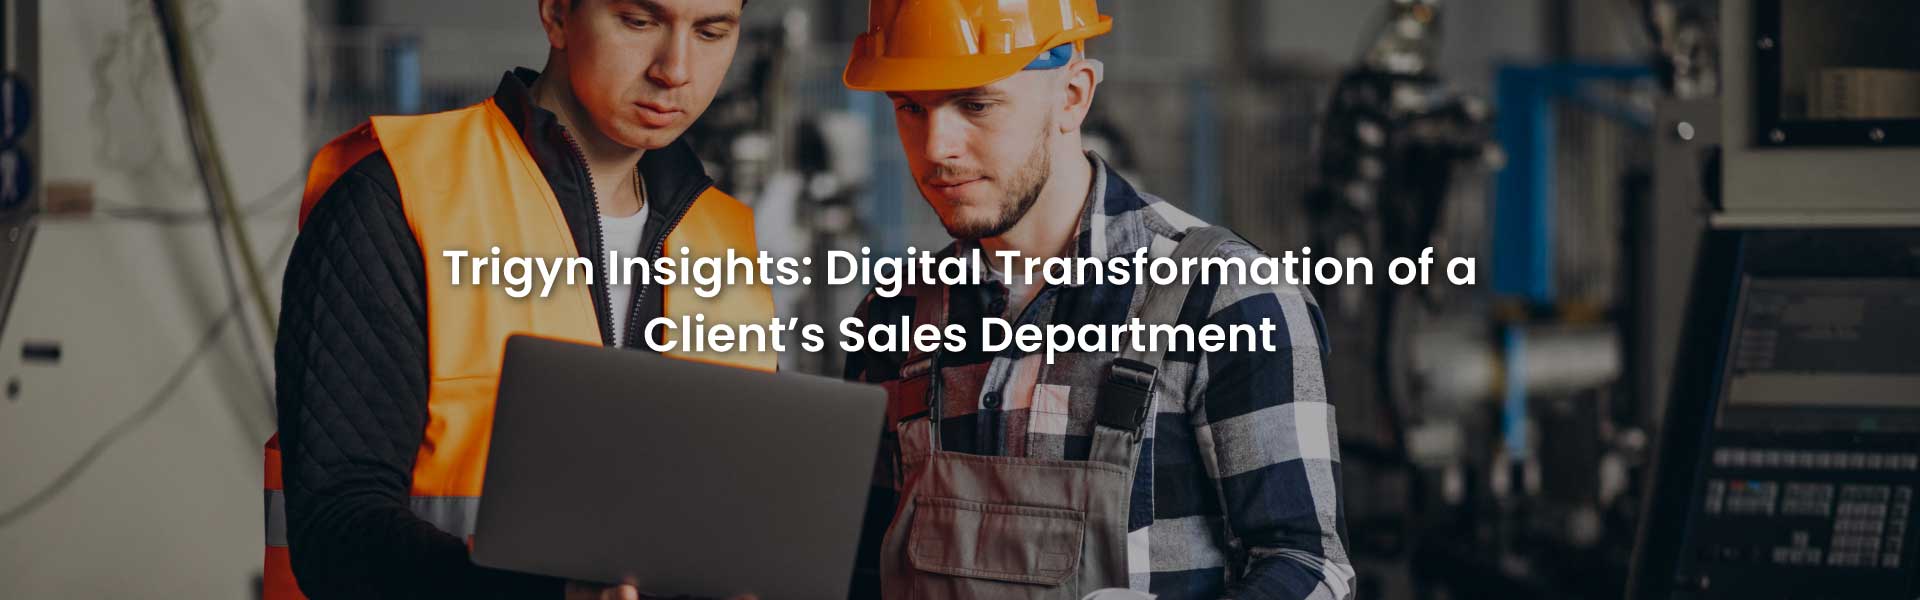 Digital Transformation of a Client’s Sales Department